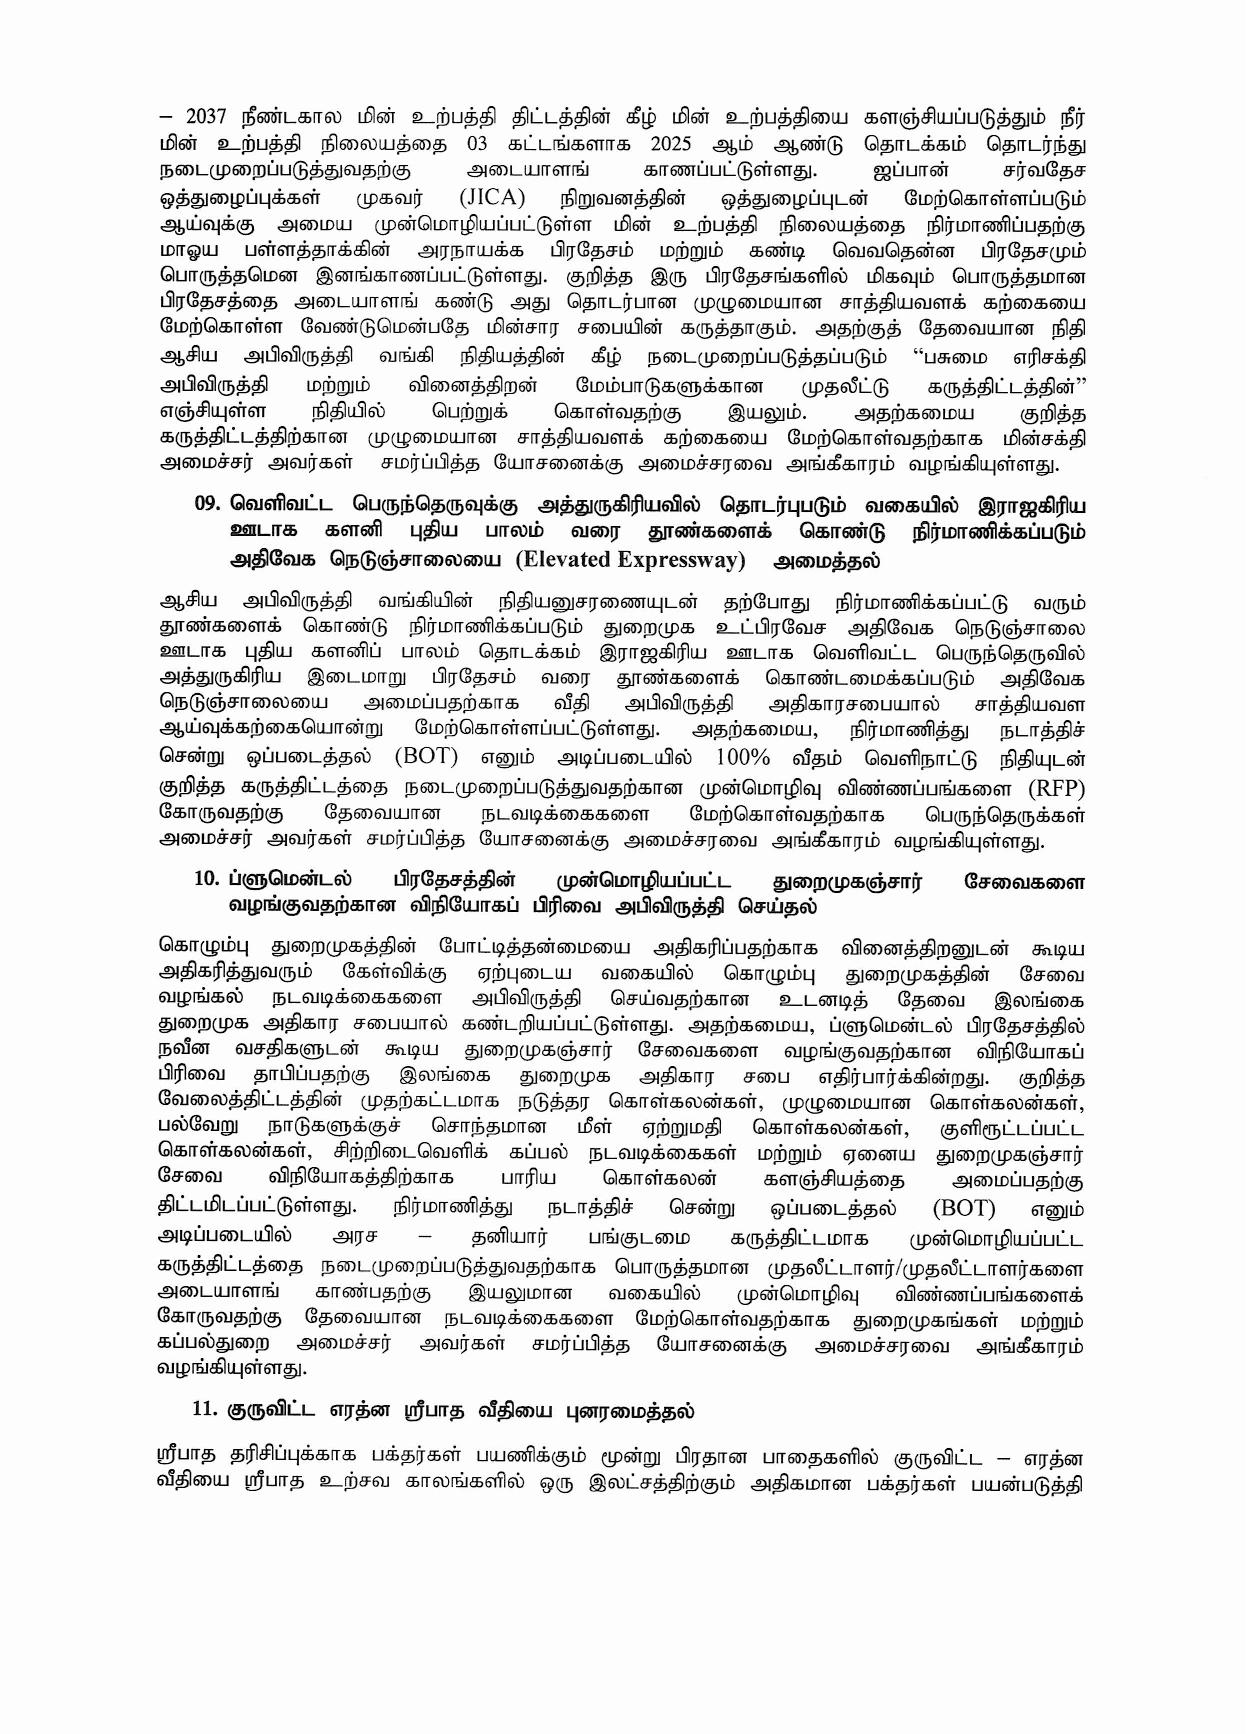 Cabinet Decision on 25.01.2021 Tamil page 004